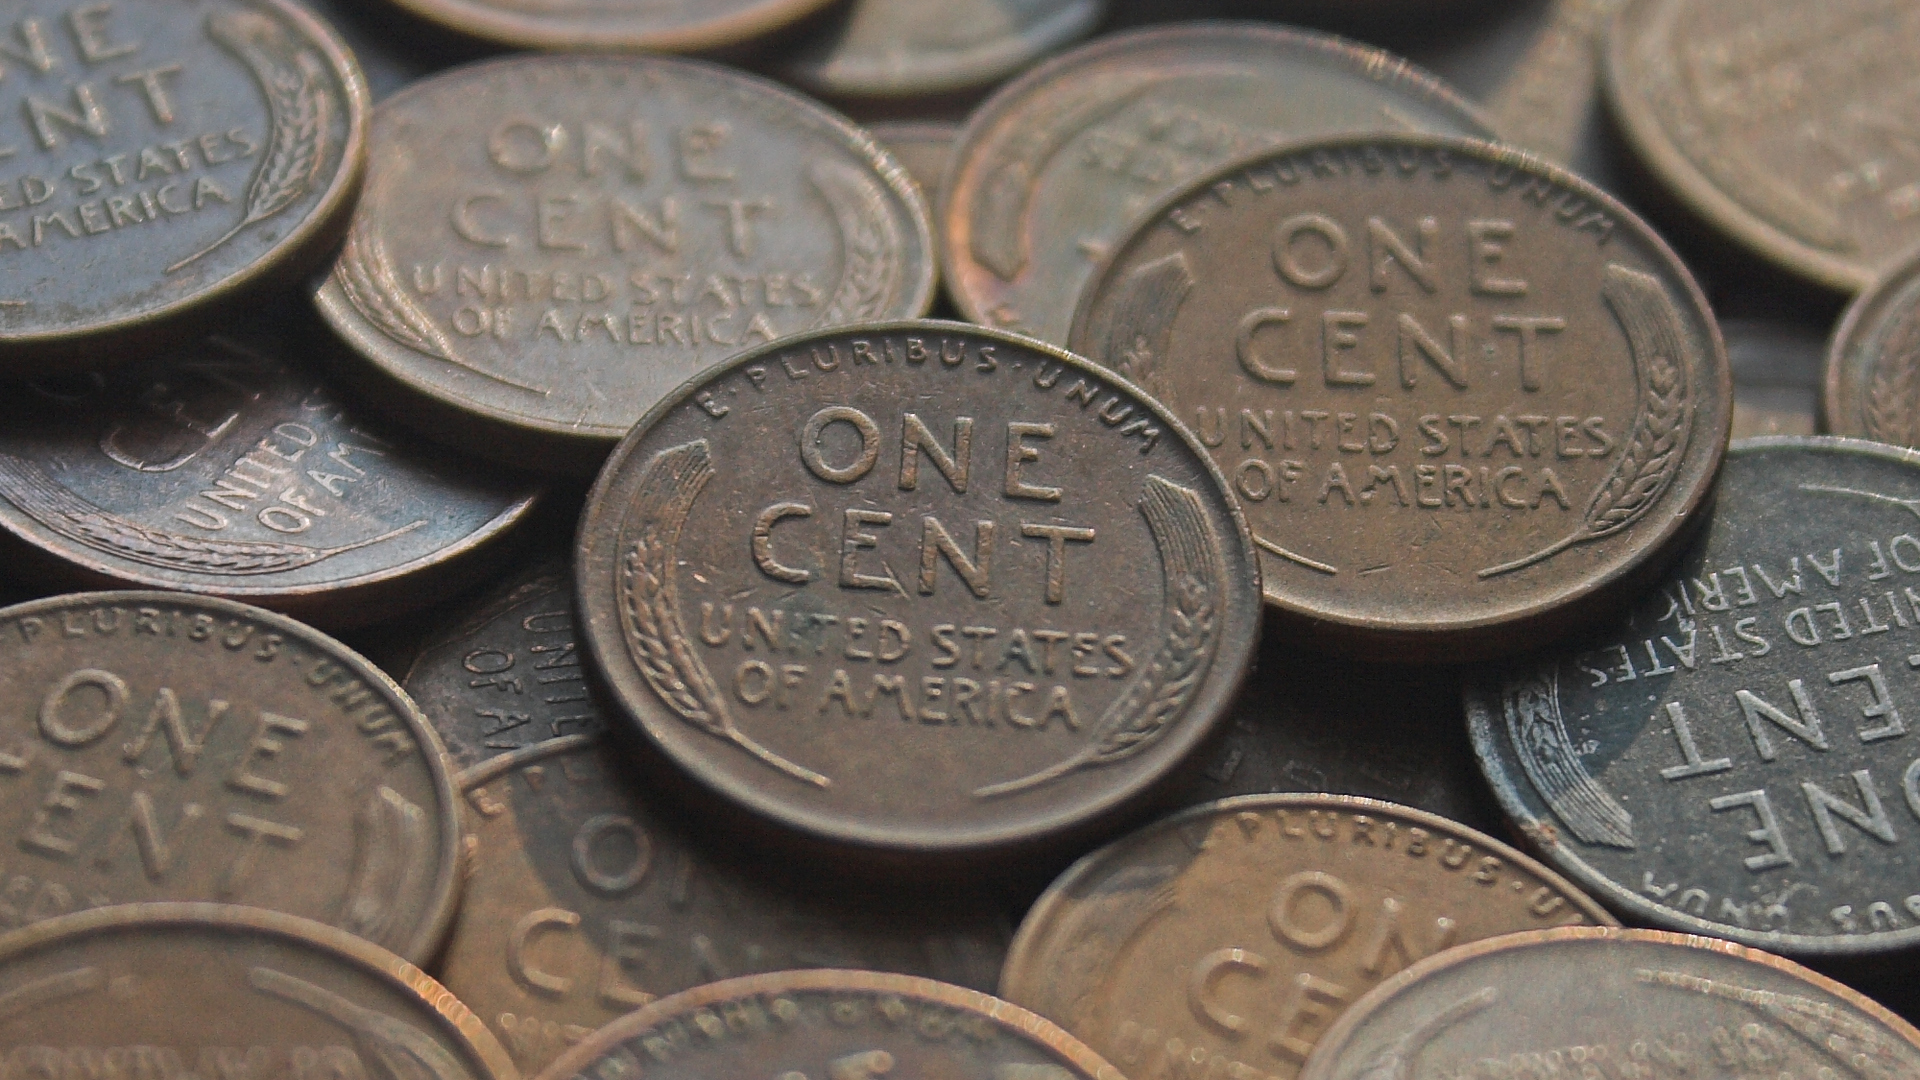 One Cent, Coin Type from United States - Online Coin Club